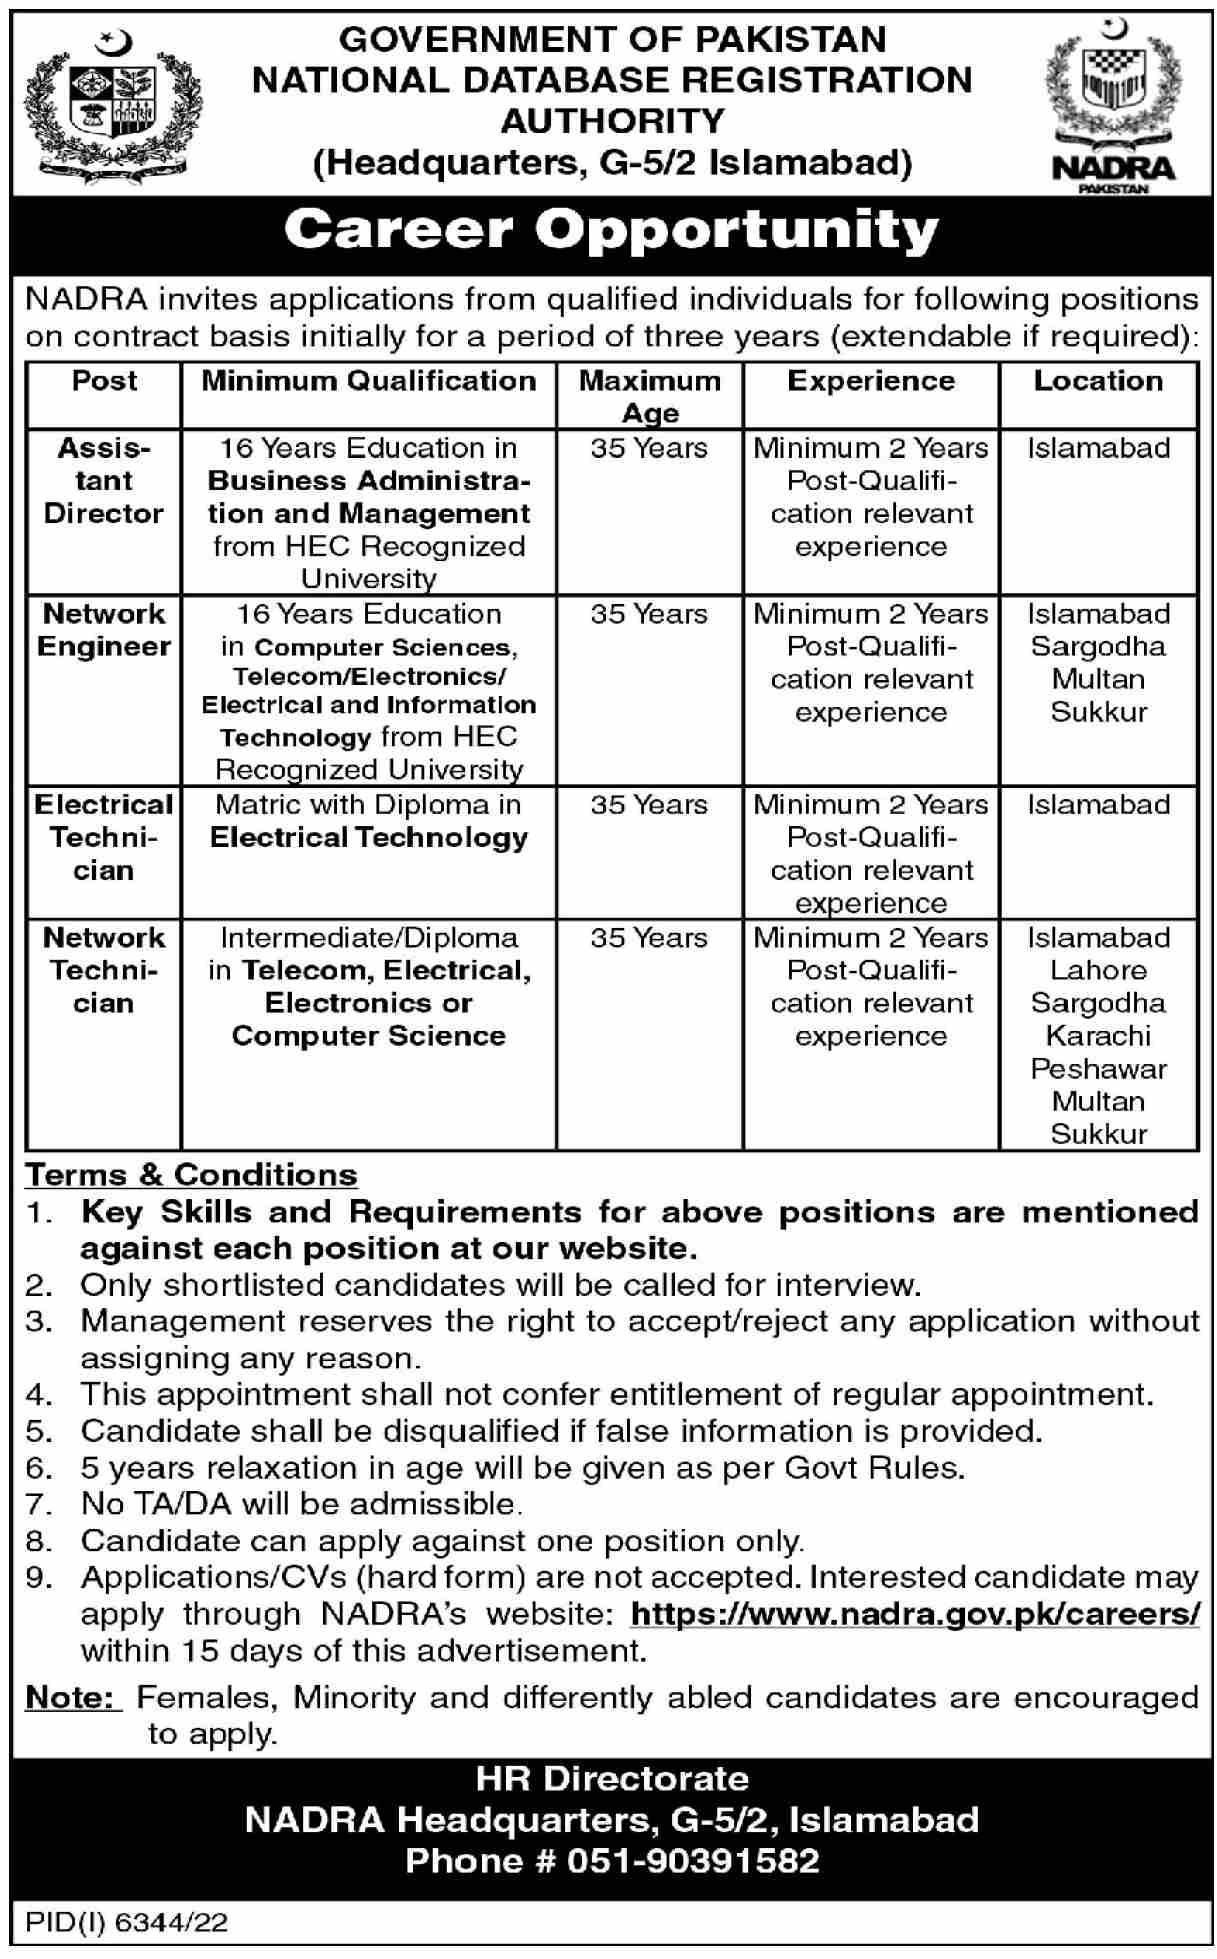 LATEST JOB IN GOVERNMENT OF PAKISTAN NATIONAL DATABASE REGISTRATION AUTHORITY 2023